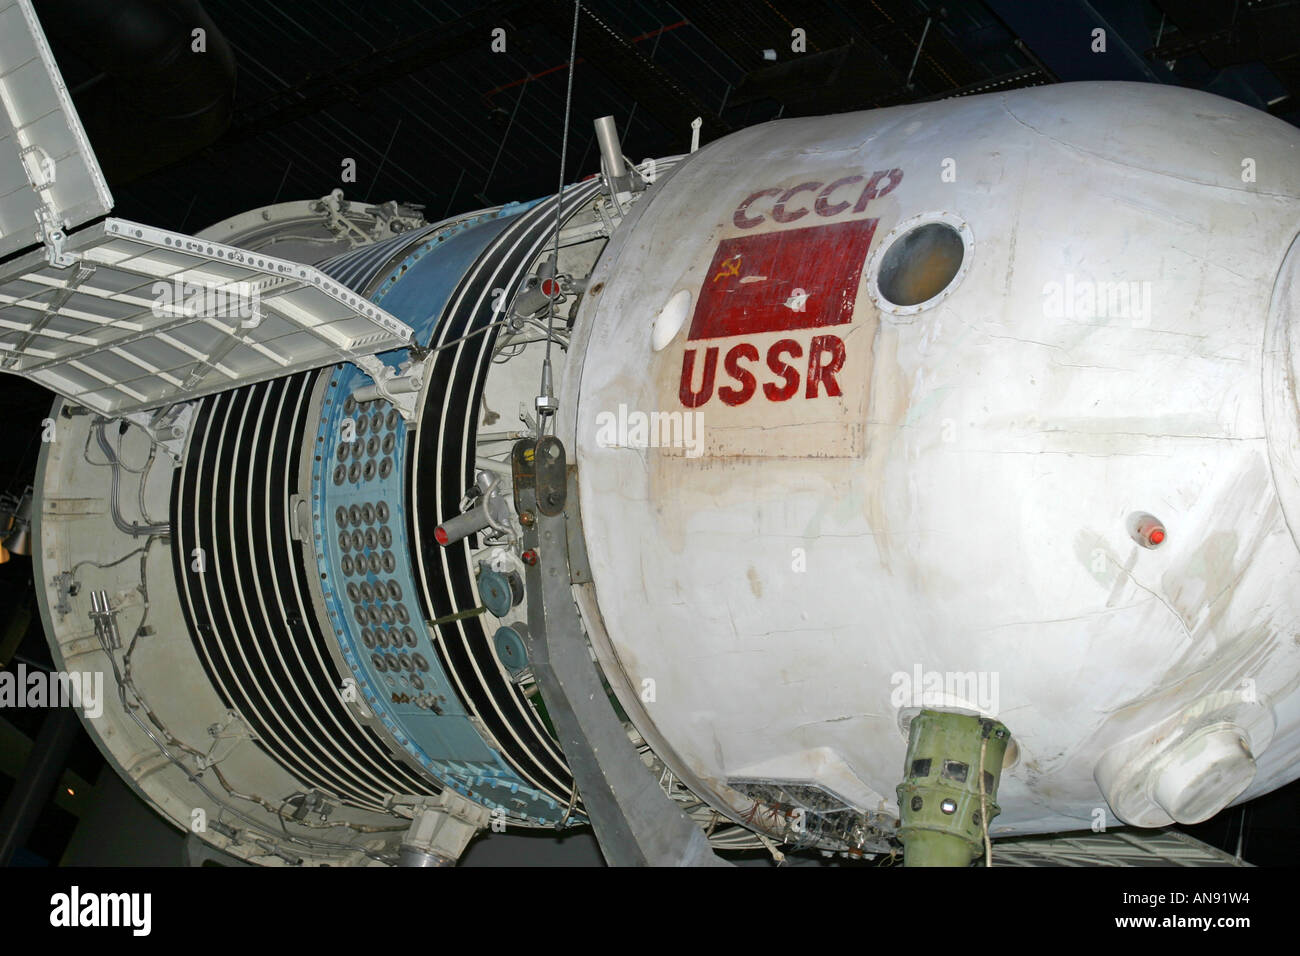 early-7k-ok-soyuz-at-national-space-centre-leicester-england-AN91W4.jpg